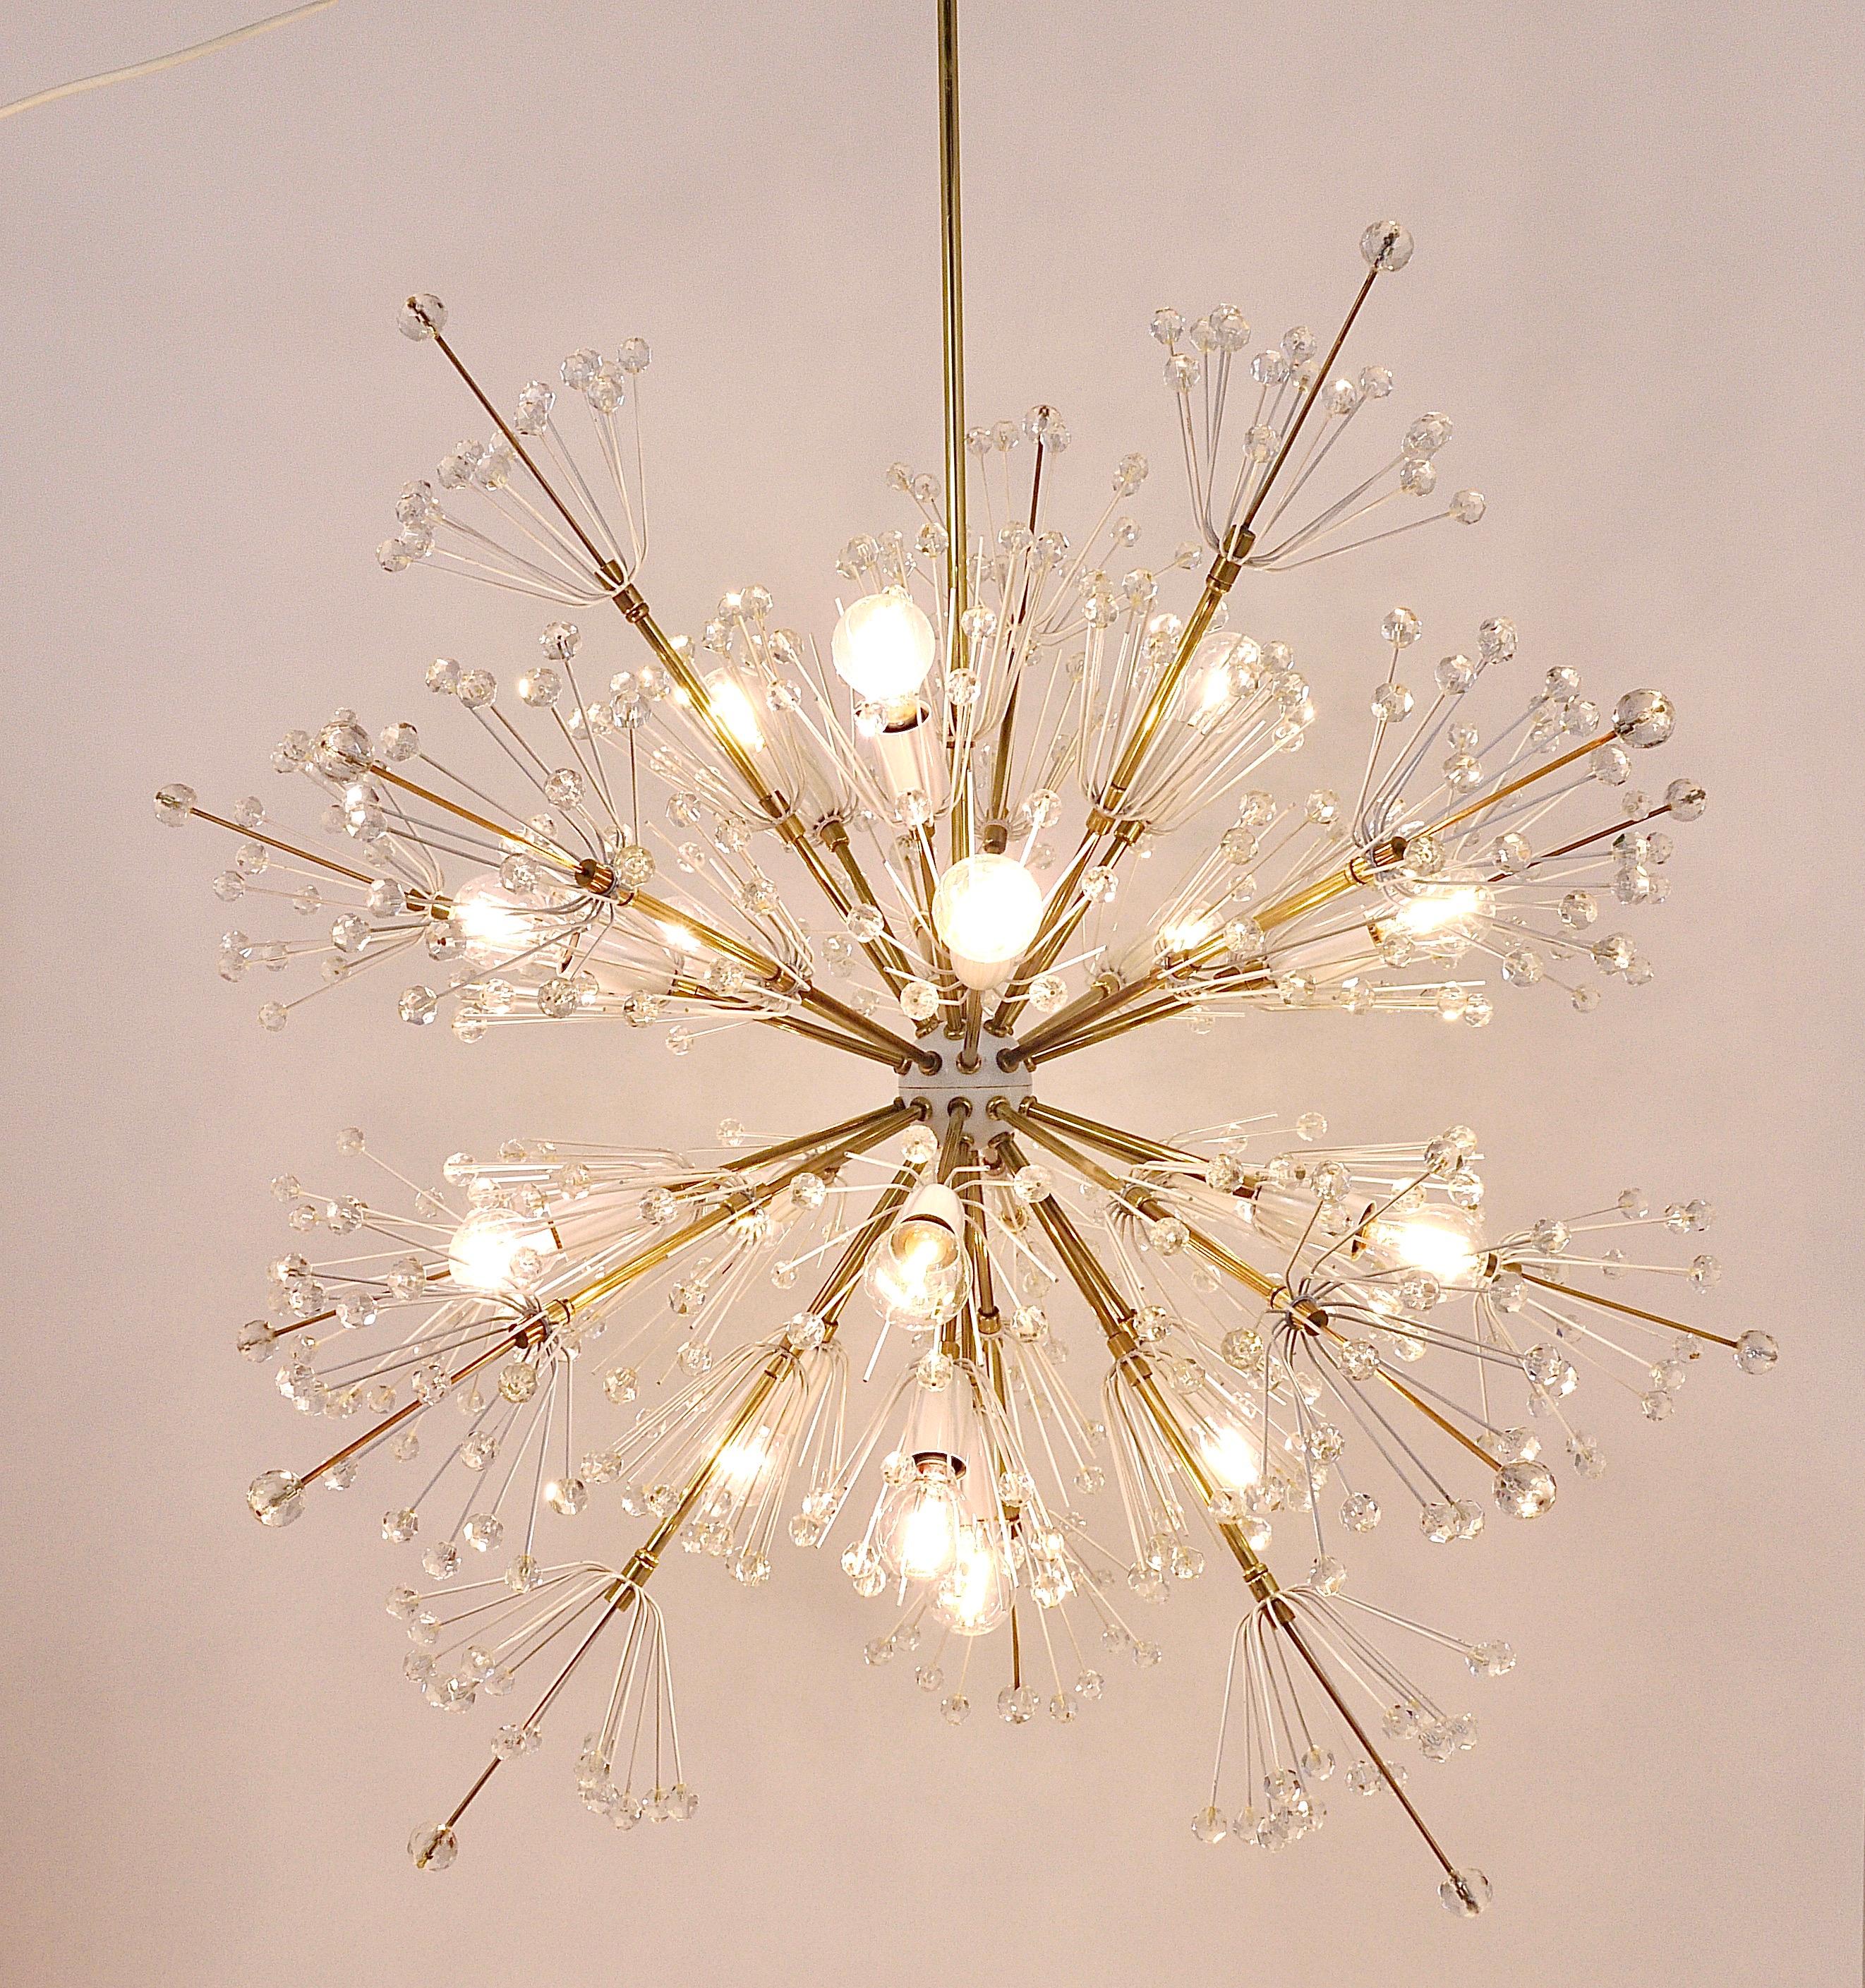 We are happy to offer this beautiful and unusual Midcentury Blowball Snowflake Sputnik chandelier from the 1950s. Designed by Emil Stejnar, executed by Rupert Nikoll in Vienna/Austria. No standard model, the chandelier was originally custom-made for